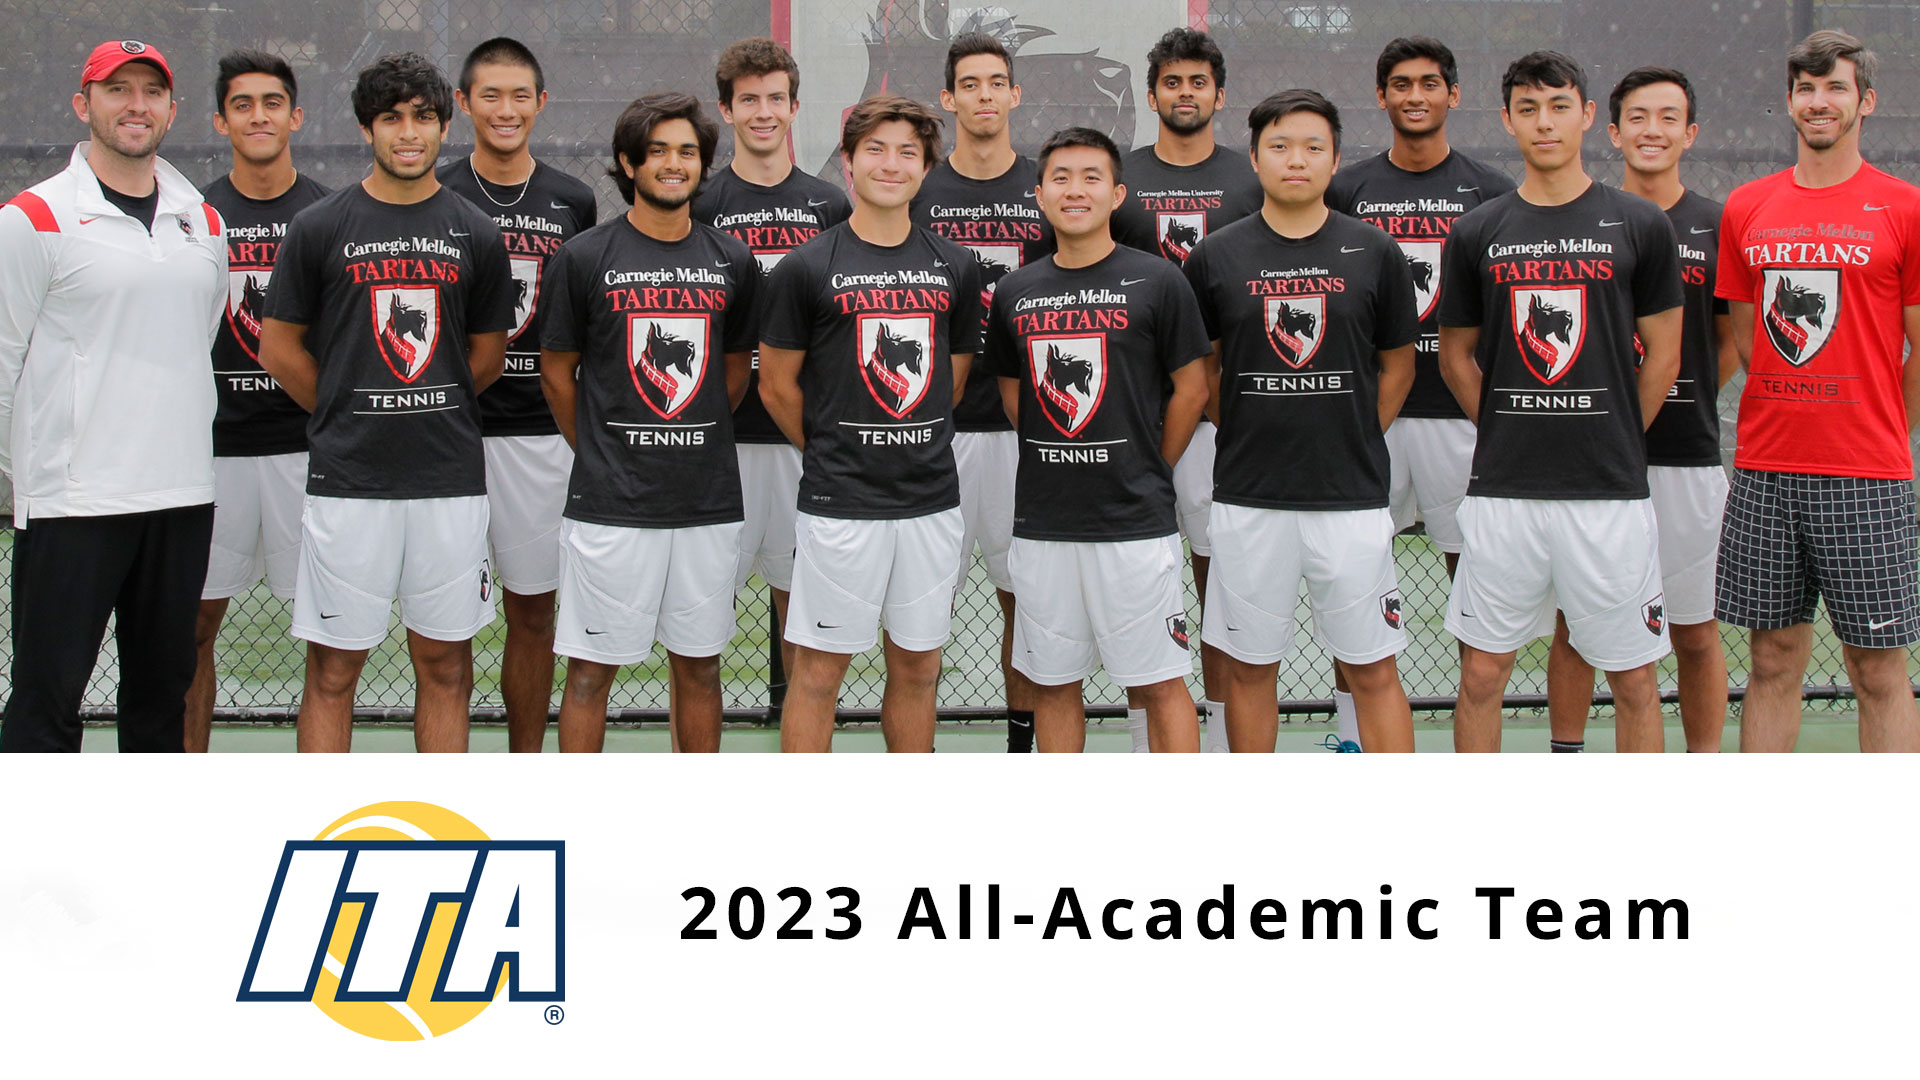 group photo of men's tennis team in two rows wearing black shirts and white shorts logo of ITA at bottom with text reading 2023 All-Academic Team